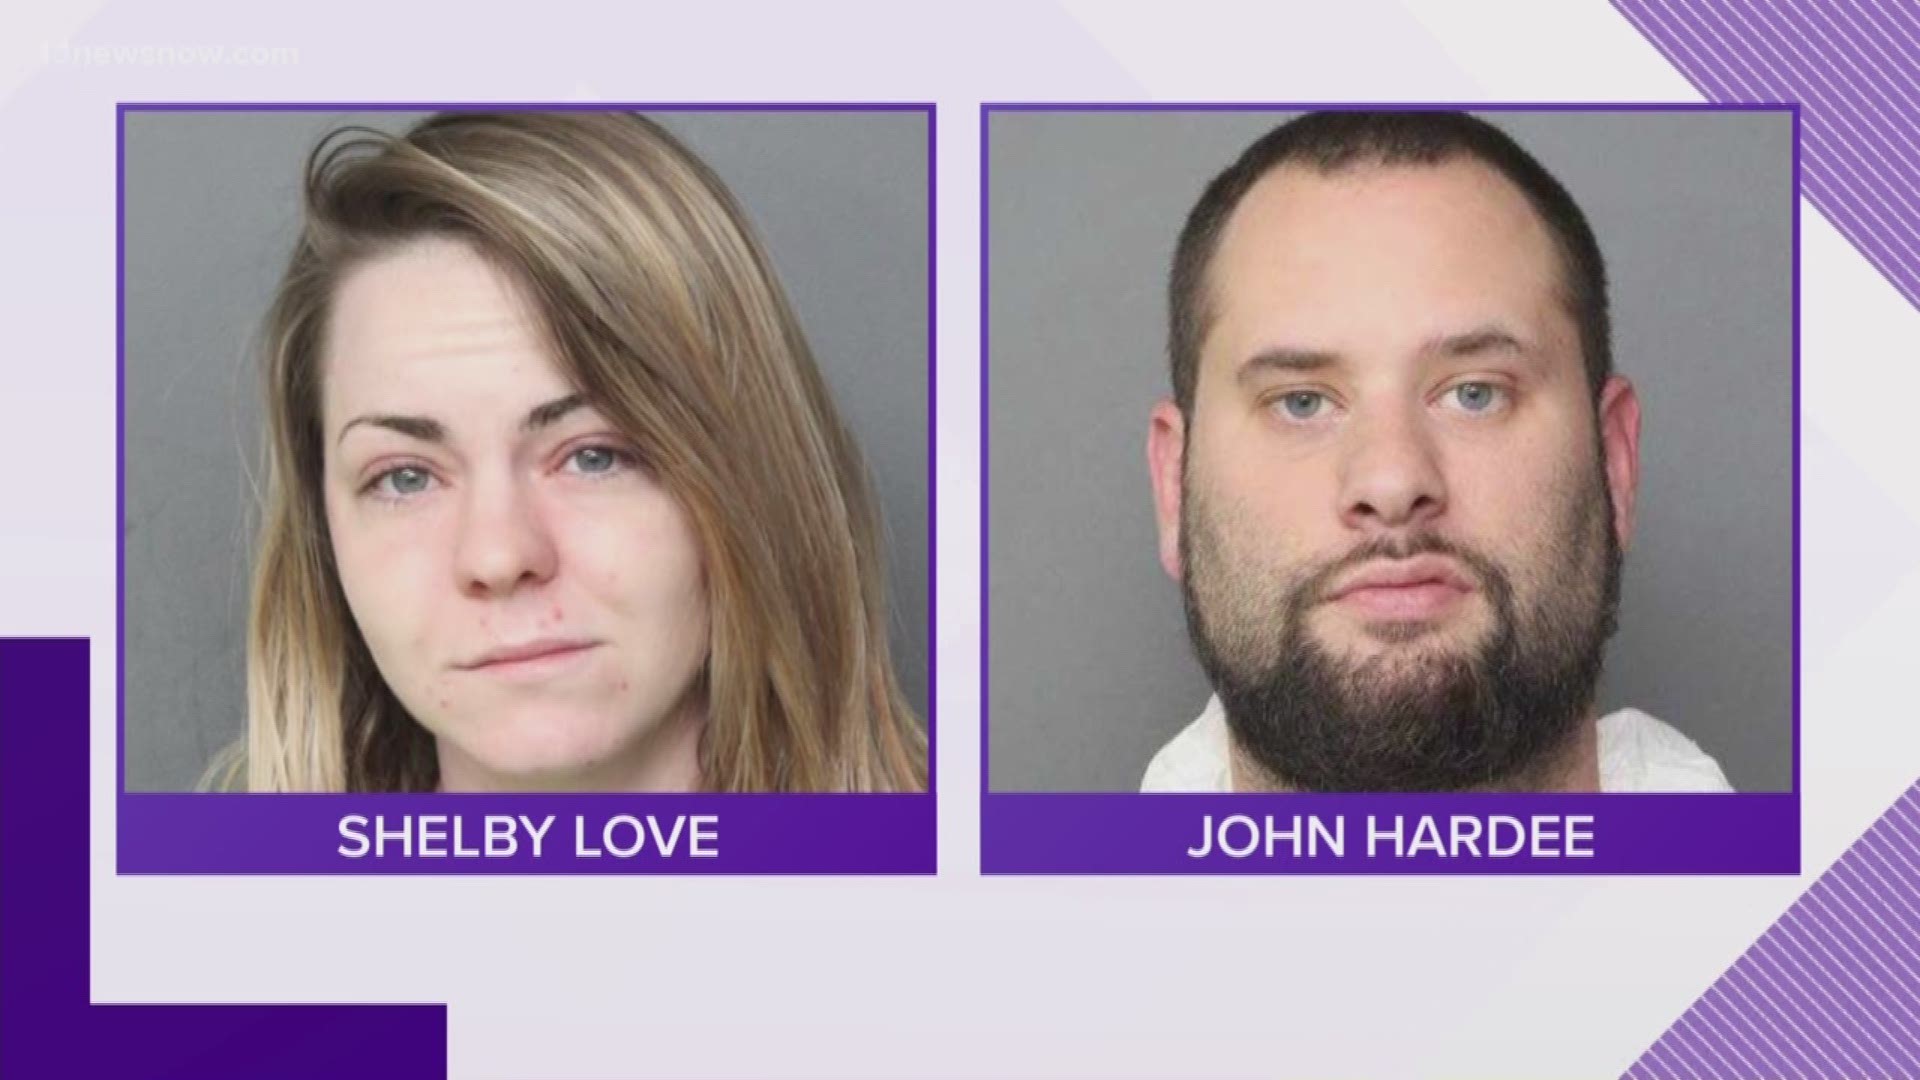 A mom and her boyfriend are charged in the death of a 2-year-old girl.